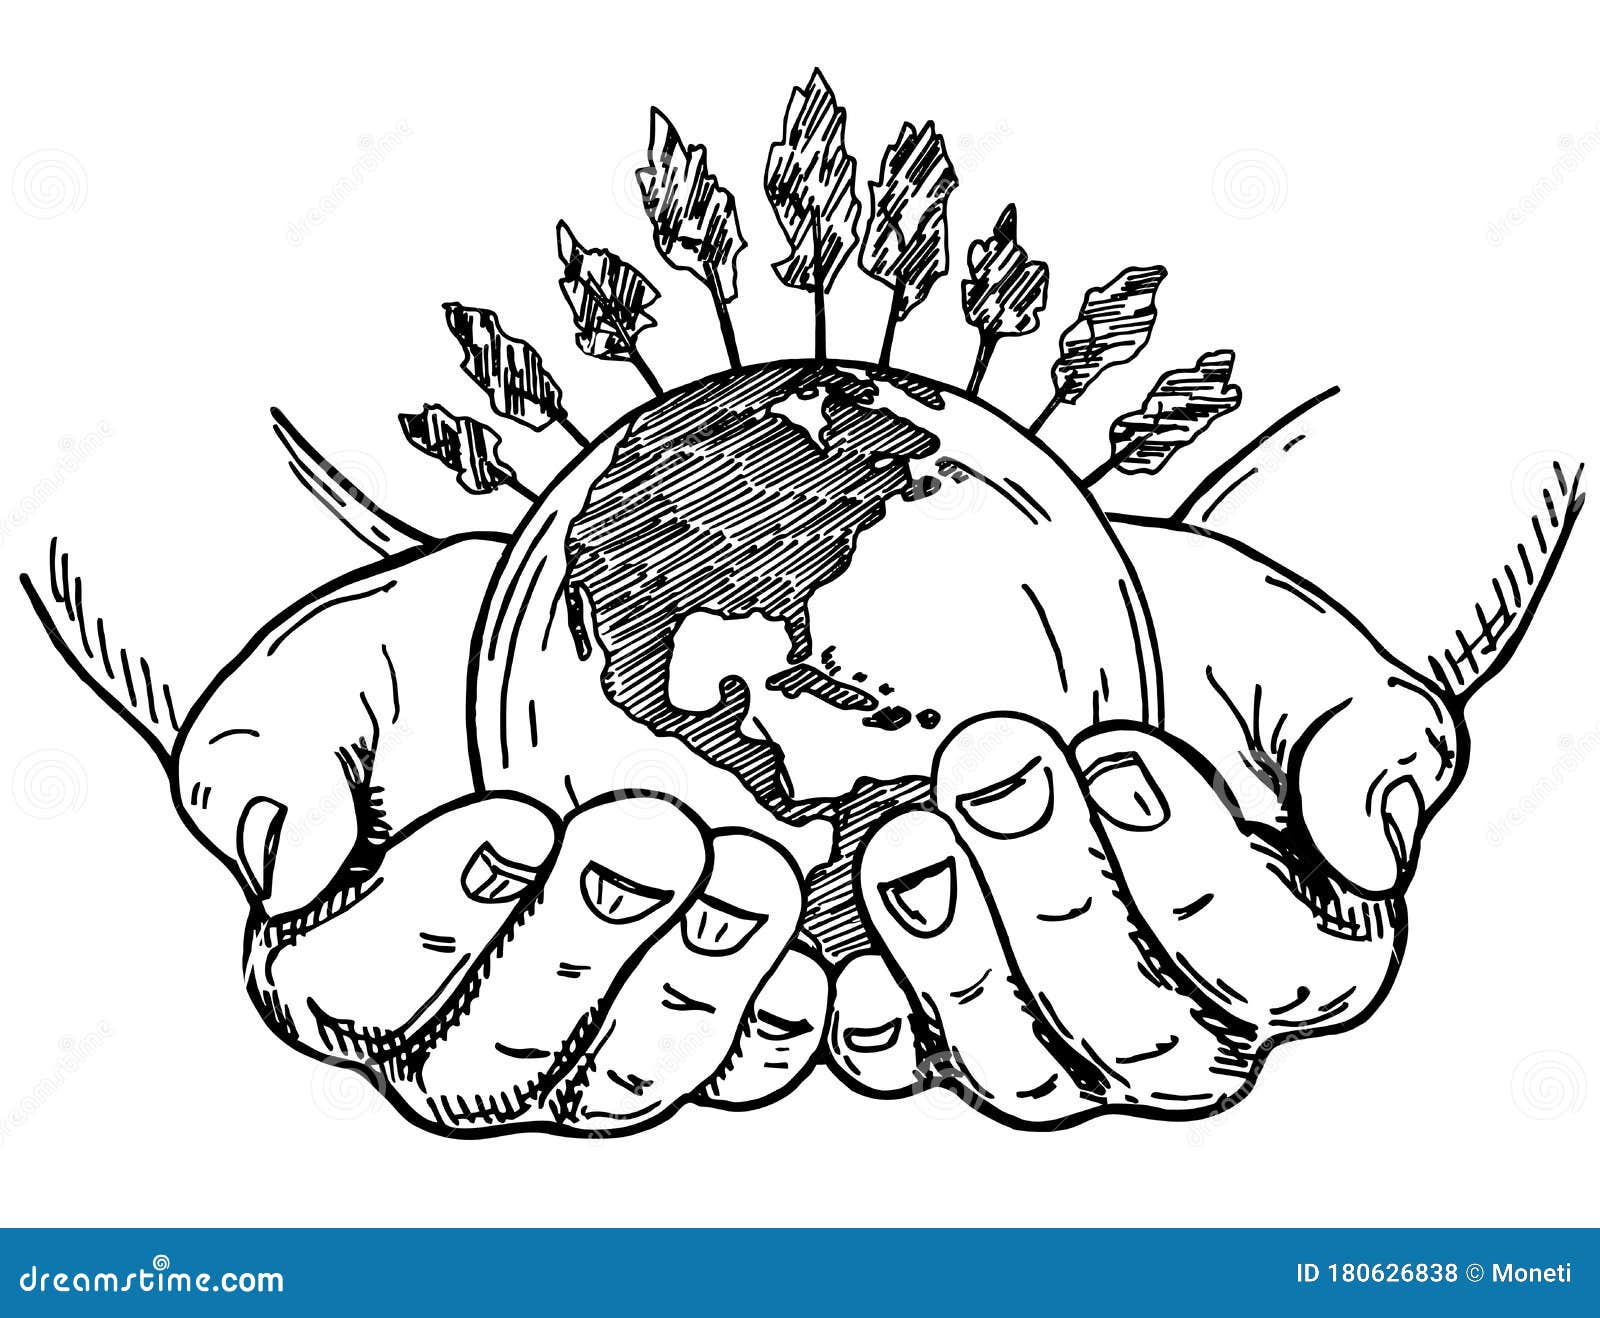 Earth In Hands In Sketch Style Two Palms Hold The Globe Save The Planet Concept Environment Concept Vintage Hand Stock Vector Illustration Of Hold Earth